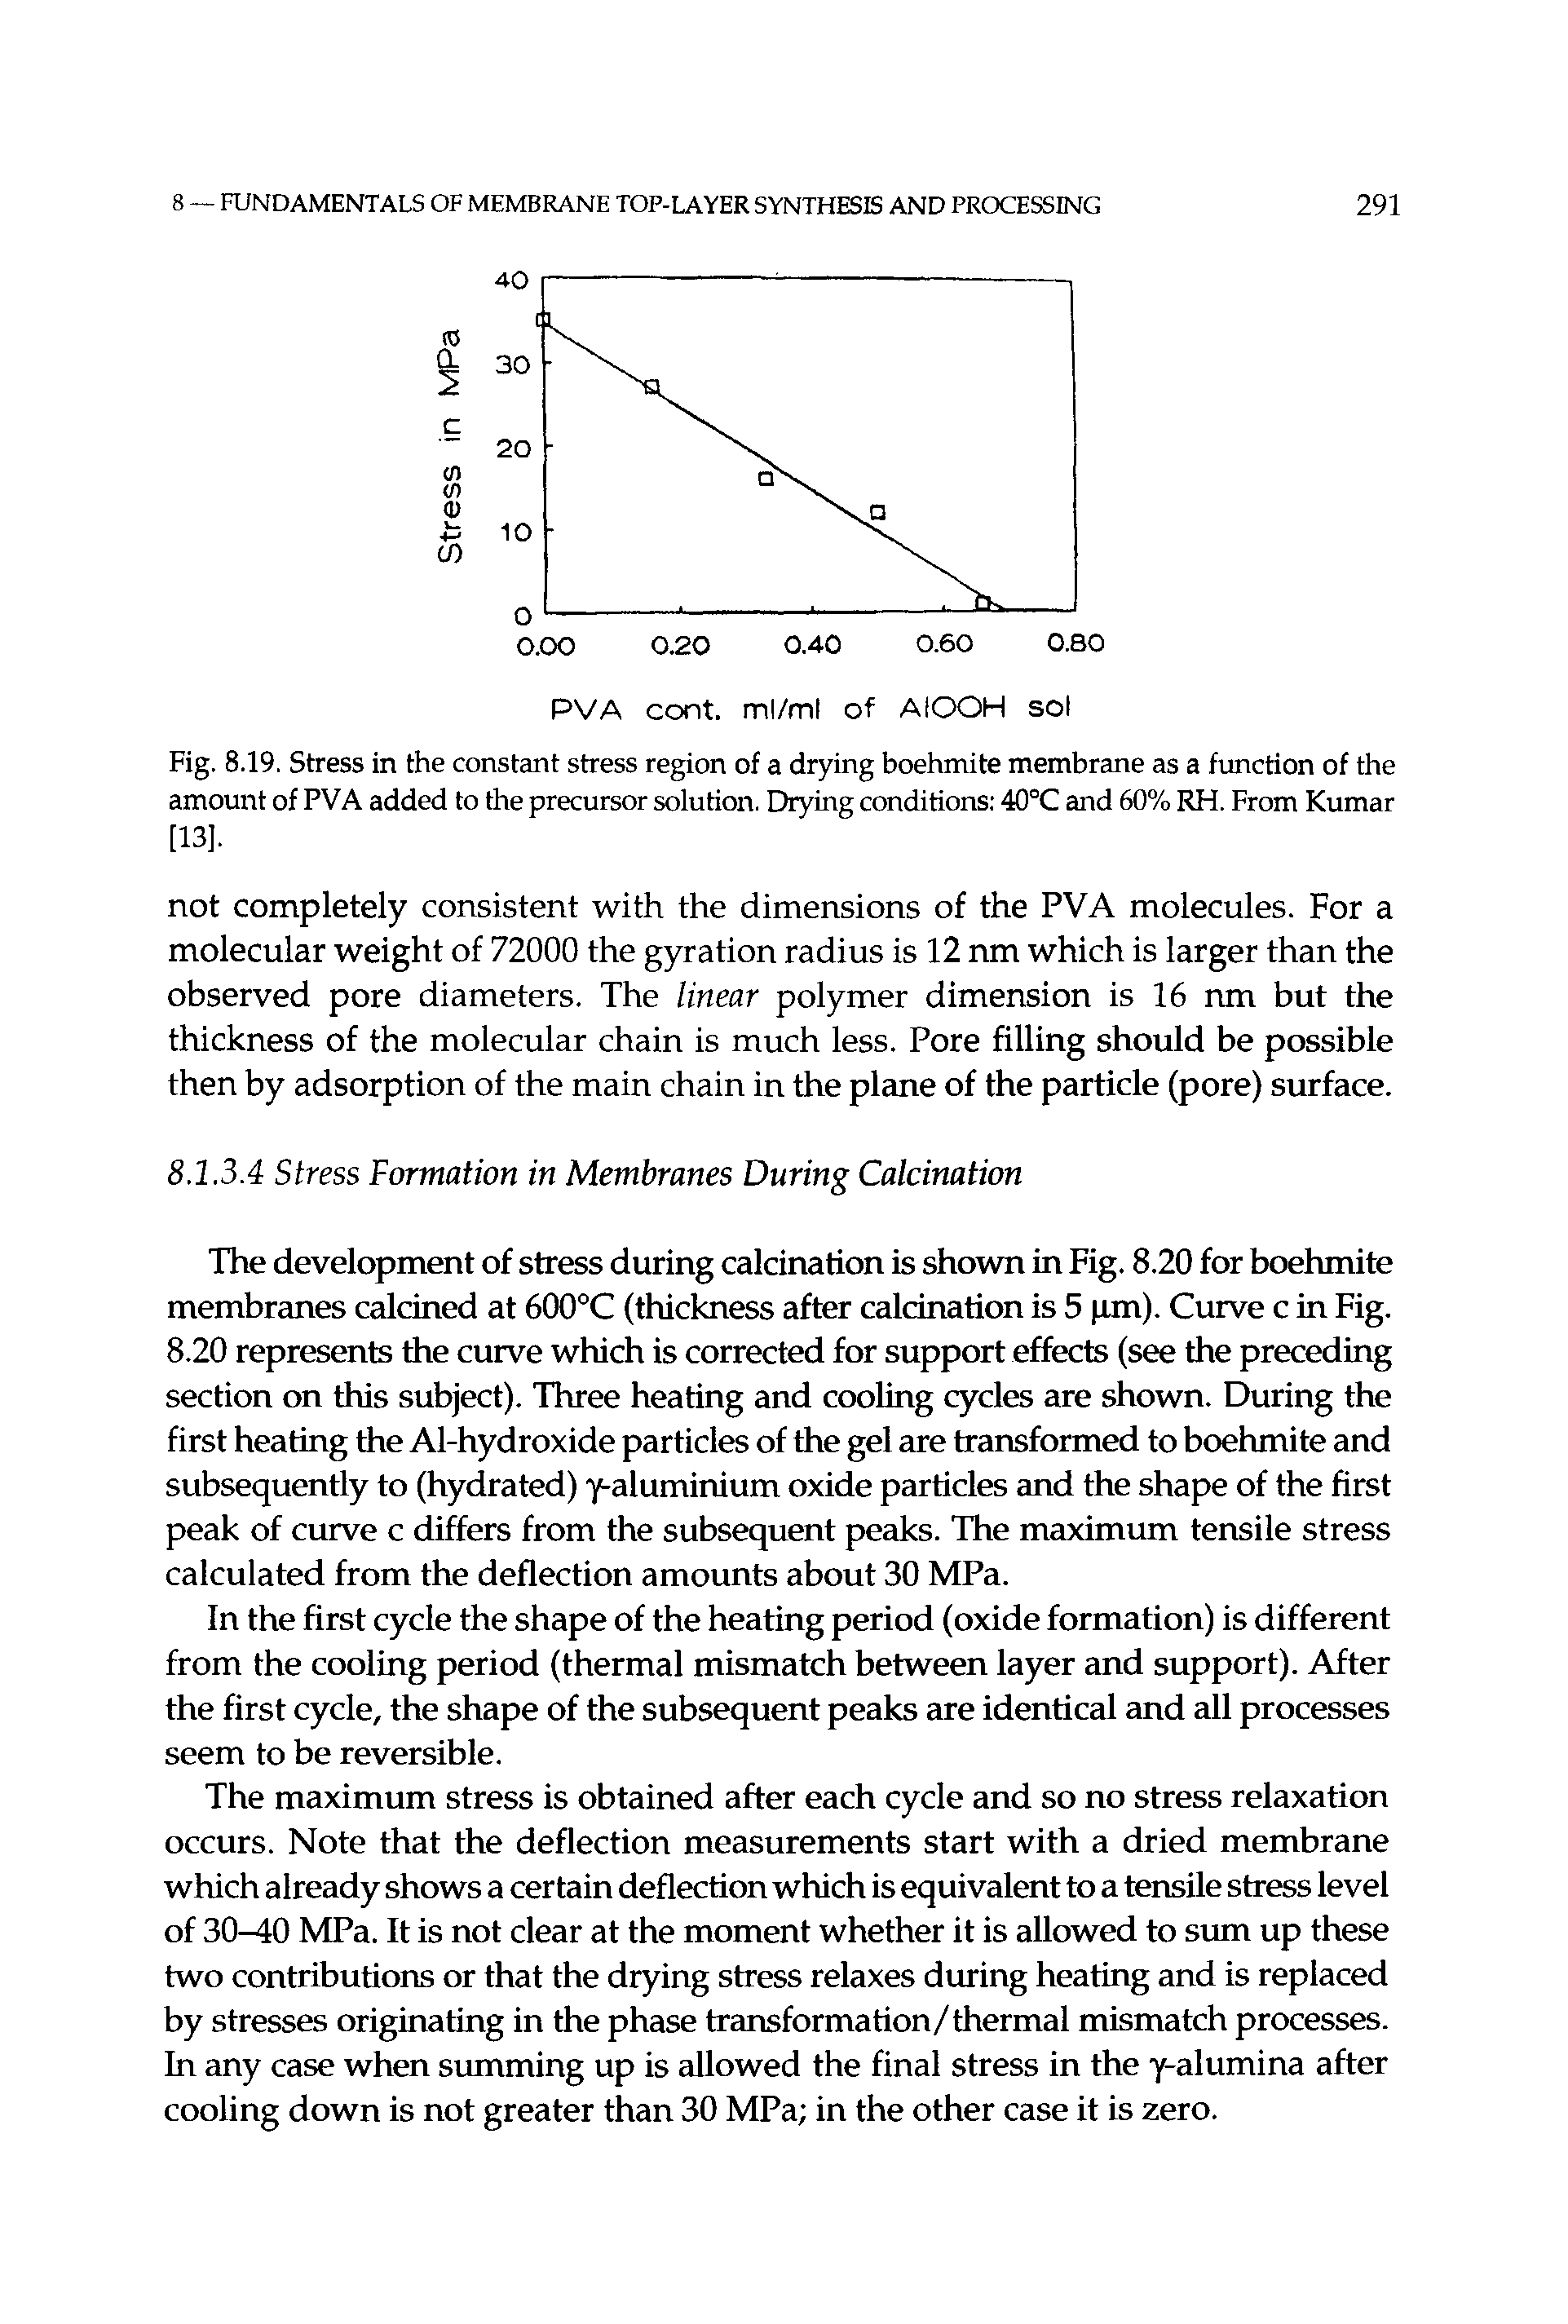 Fig. 8.19. Stress in the constant stress region of a drying boehmite membrane as a function of the amount of PVA added to the precursor solution. Drying conditions 40°C and 60% RH. From Kumar [13].